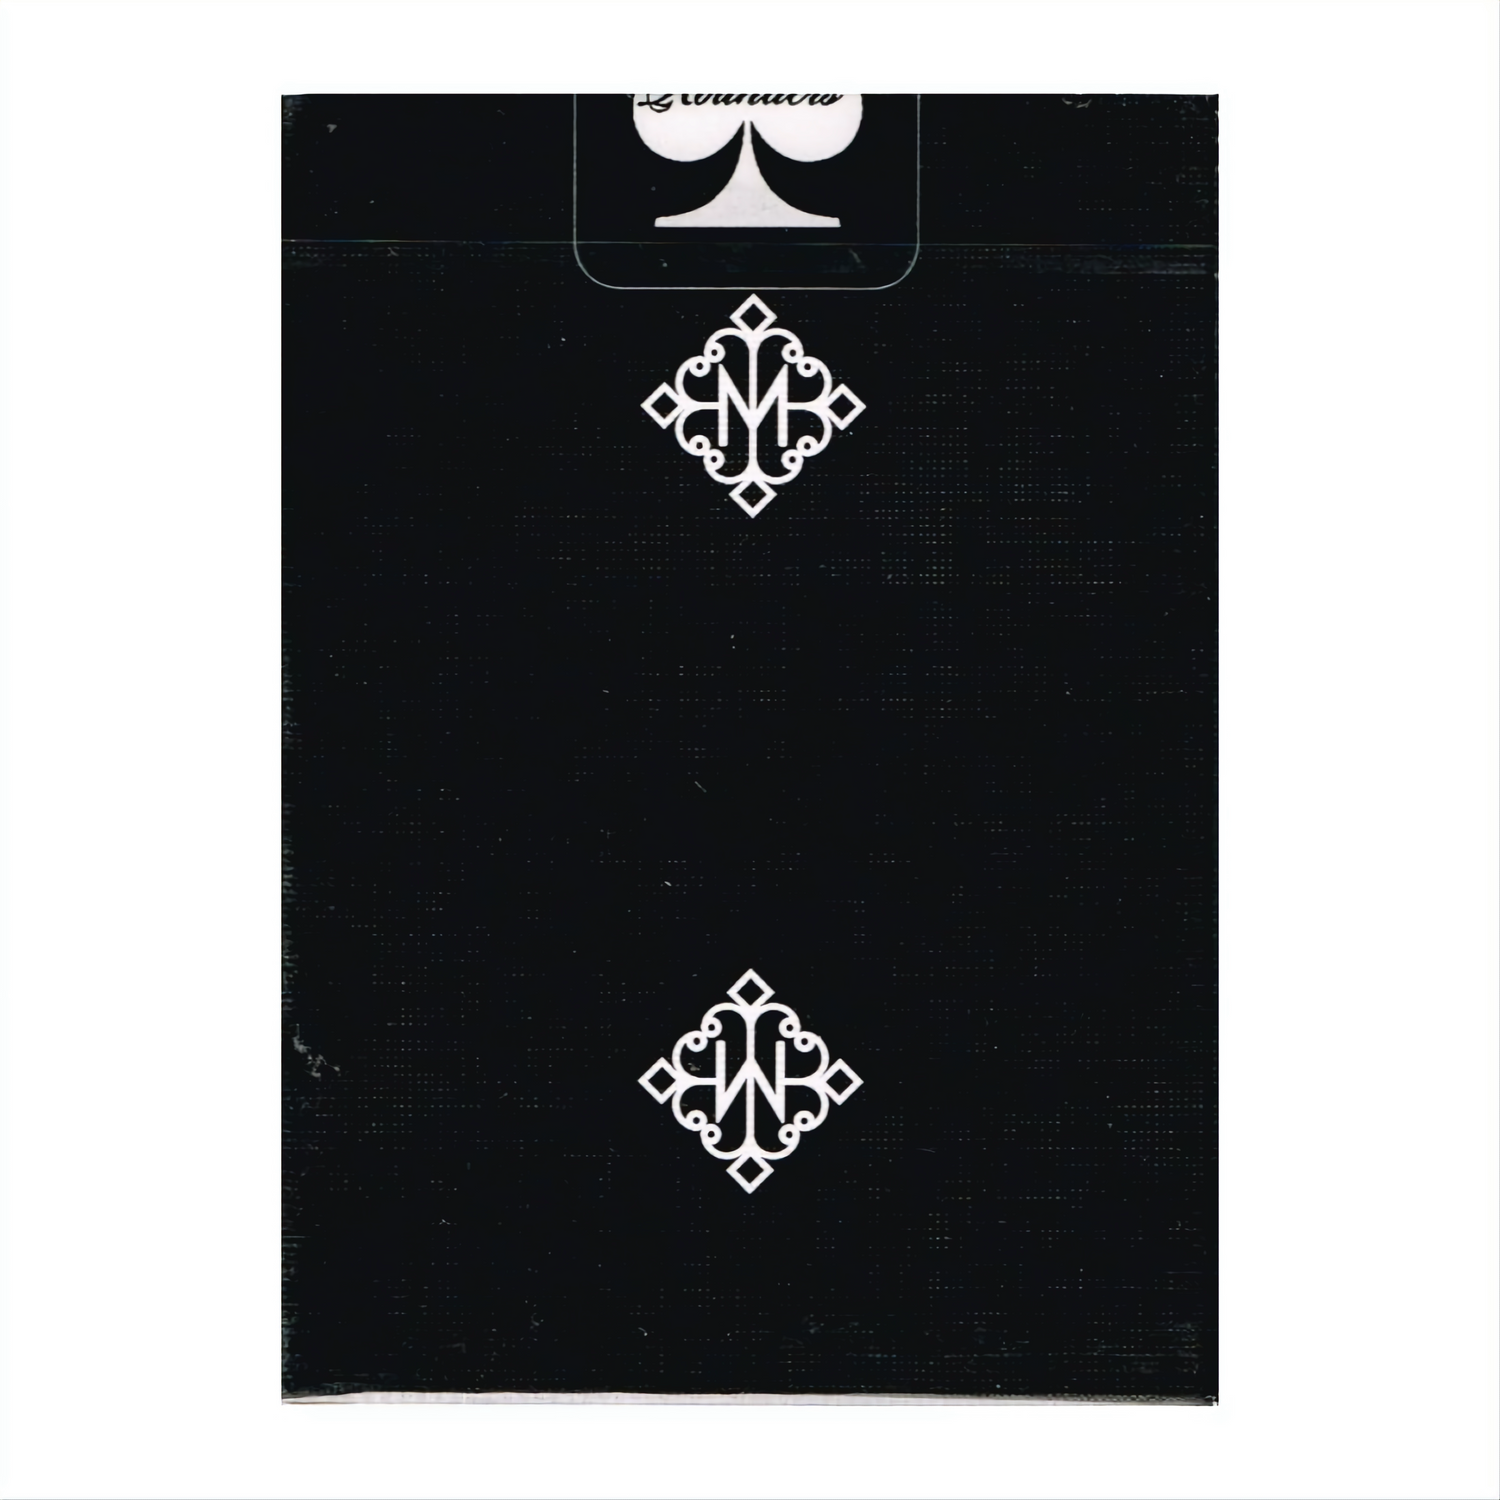 Madison Rounders by Ellusionist Playing Cards , Poker , Magic , Cardistry , Singapore